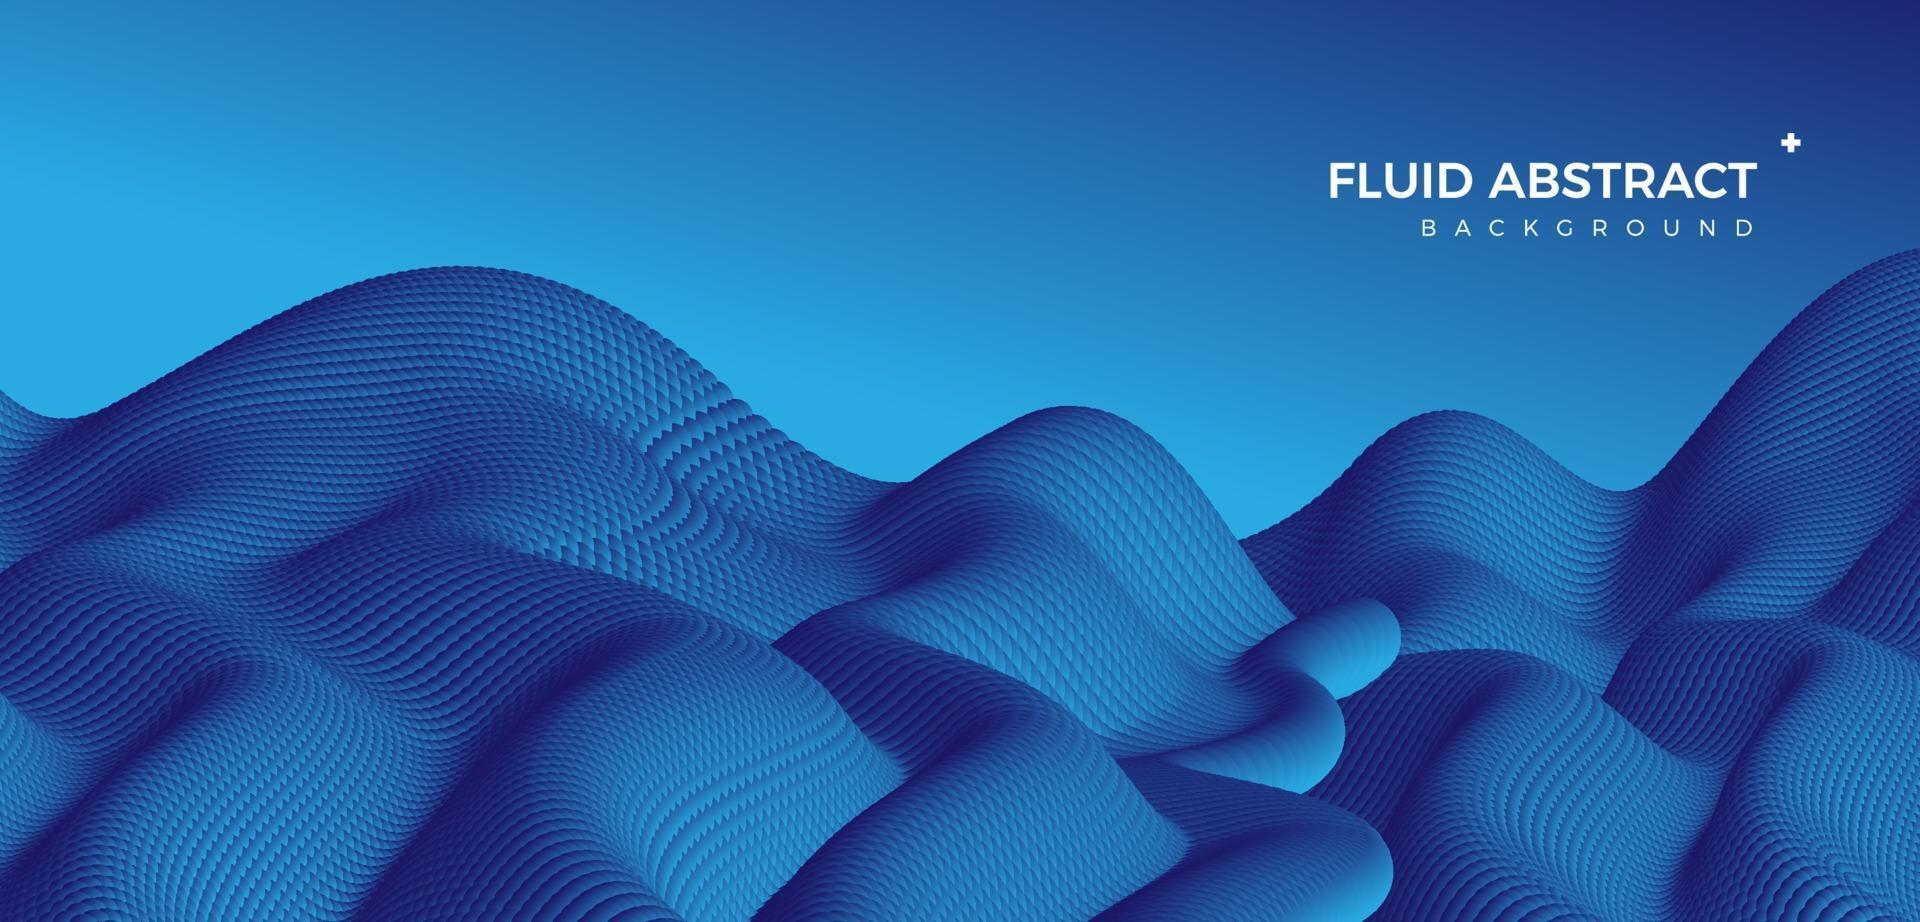 Stylish corrugated motion blue fluid gradient abstract background vector